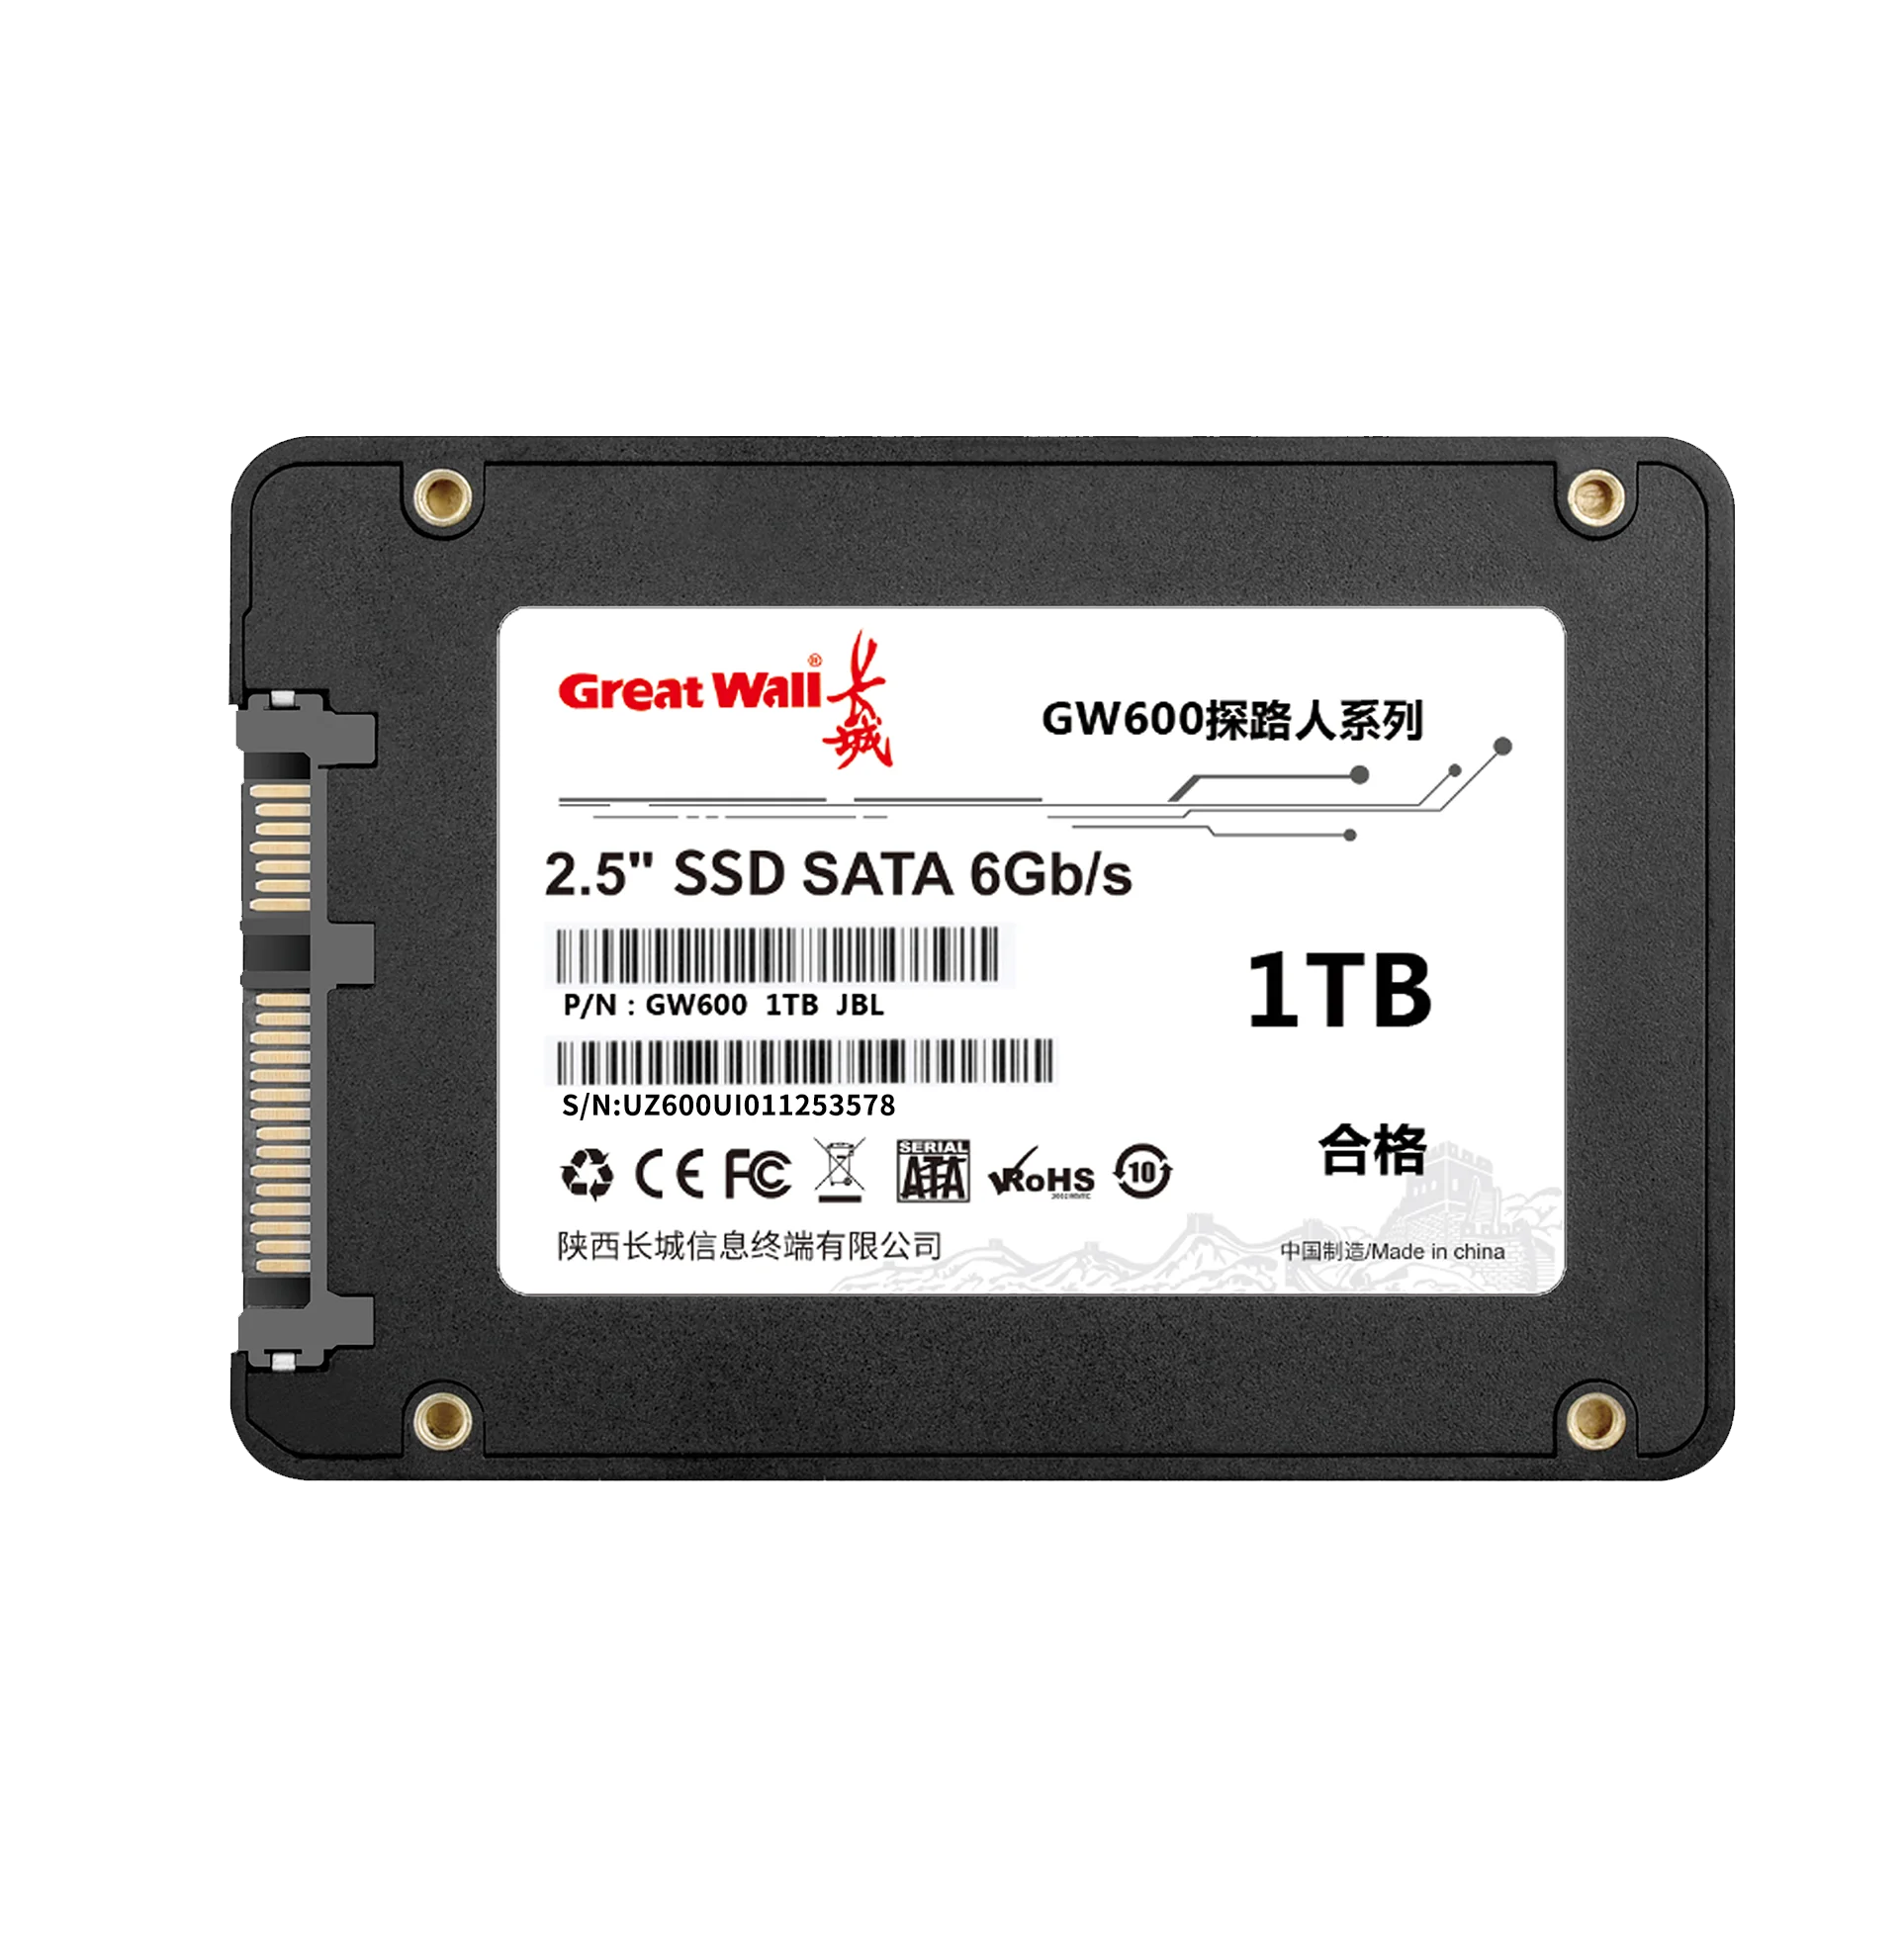 At accelerere Nord Tegne Source NEW Great Wall Ssd Sata 120GB 240GB 512GB 1Tb 2Tb Internal Hard  Drive Disk Ssd 1 Tb Solid State For Laptop Pc on m.alibaba.com